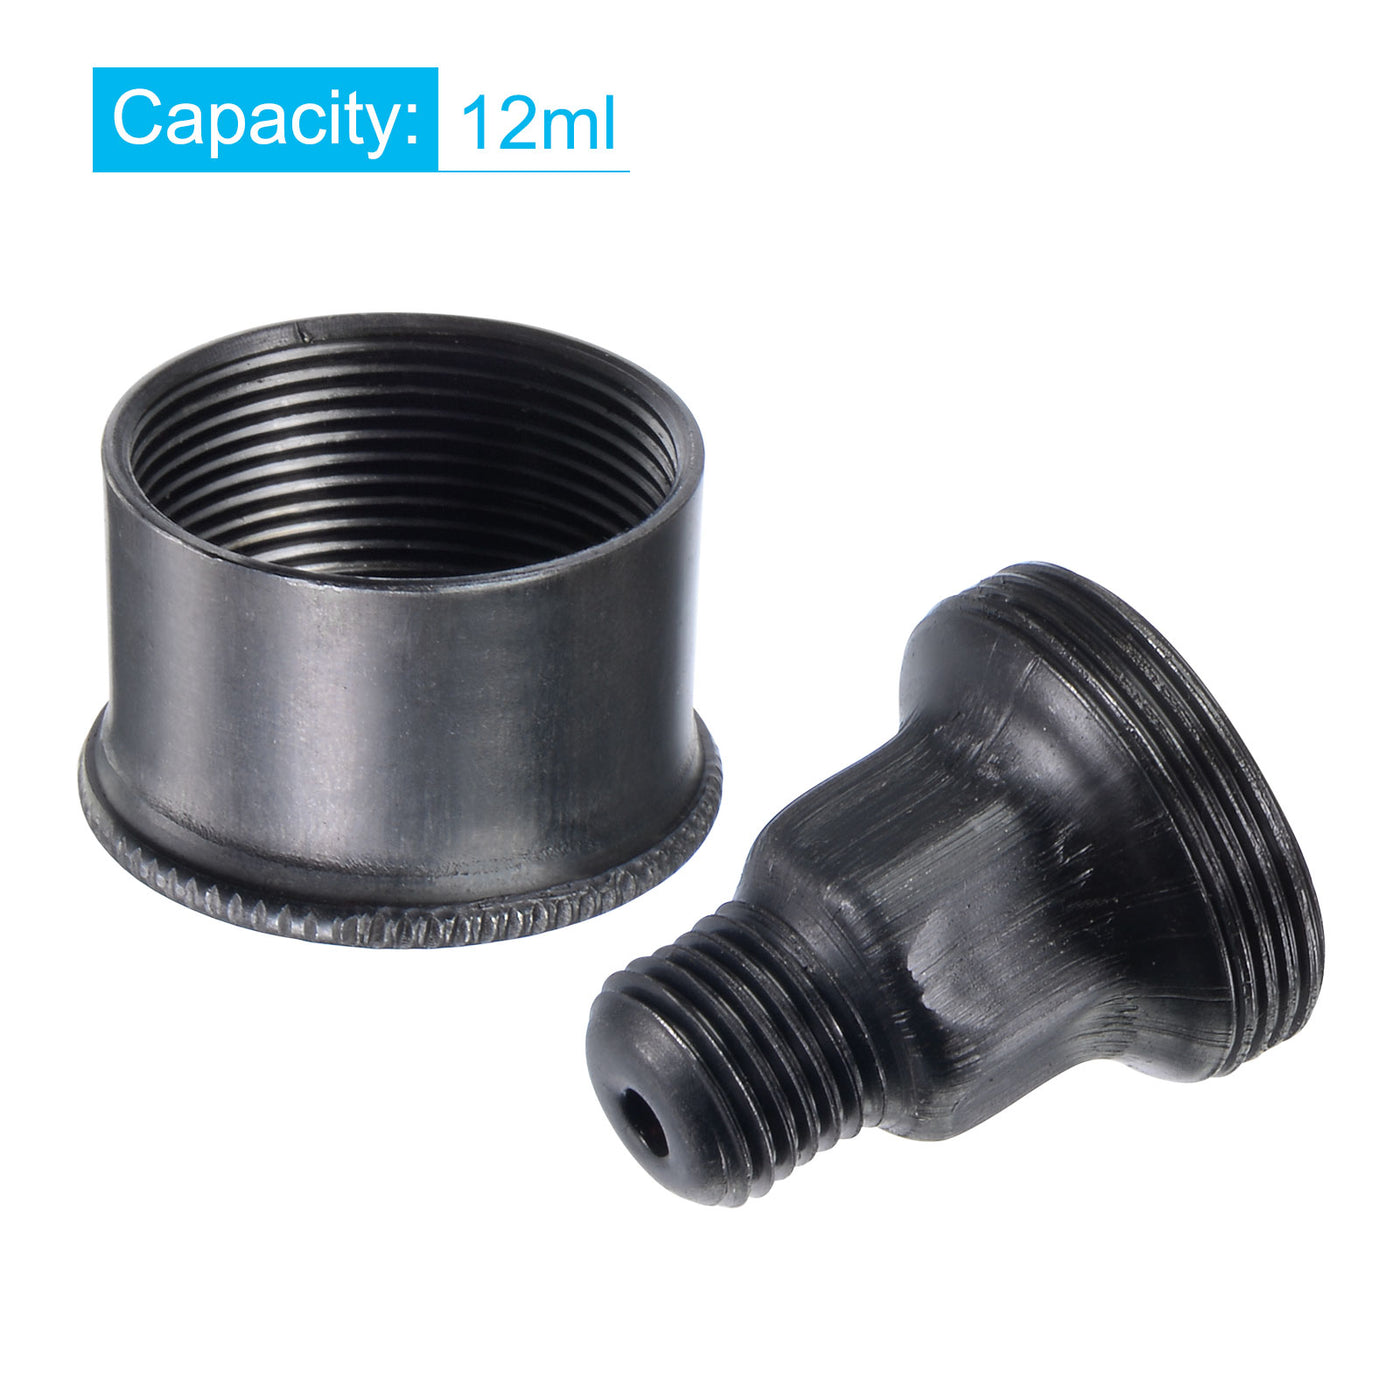 uxcell Uxcell Machine Parts G1/4 Thread 12ml Grease Oil Cup Cap Carbon Steel Oiler Black